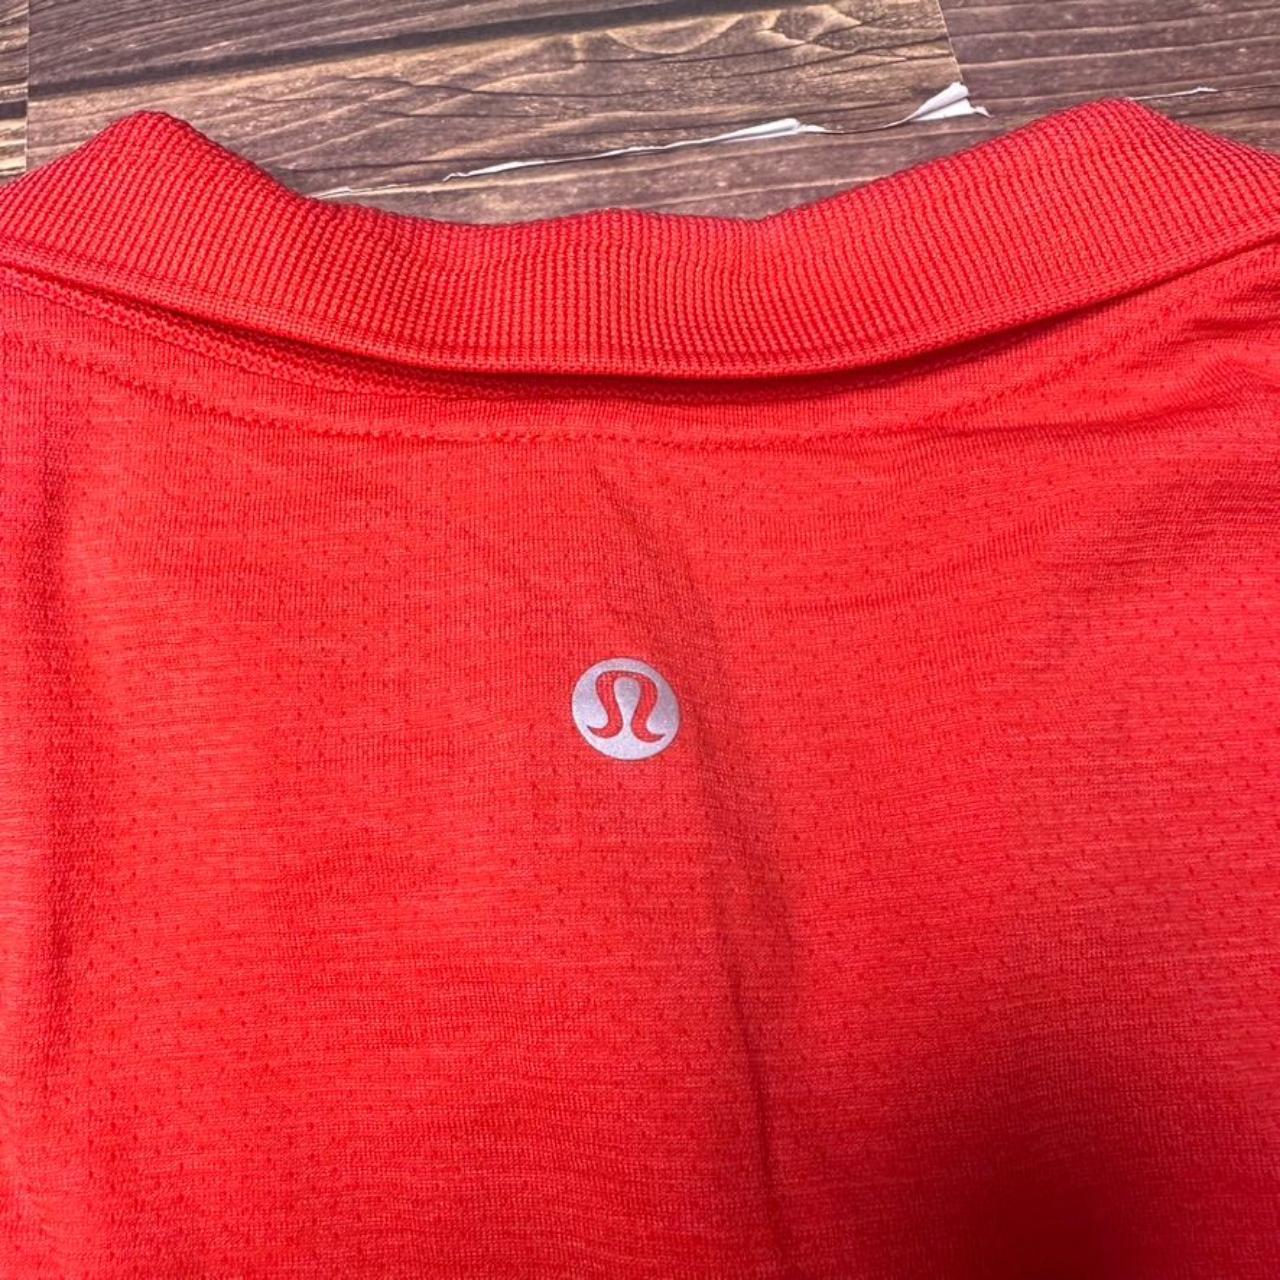 New Lululemon Swiftly Tech Relaxed-Fit Polo Shirt Hot heat red glow